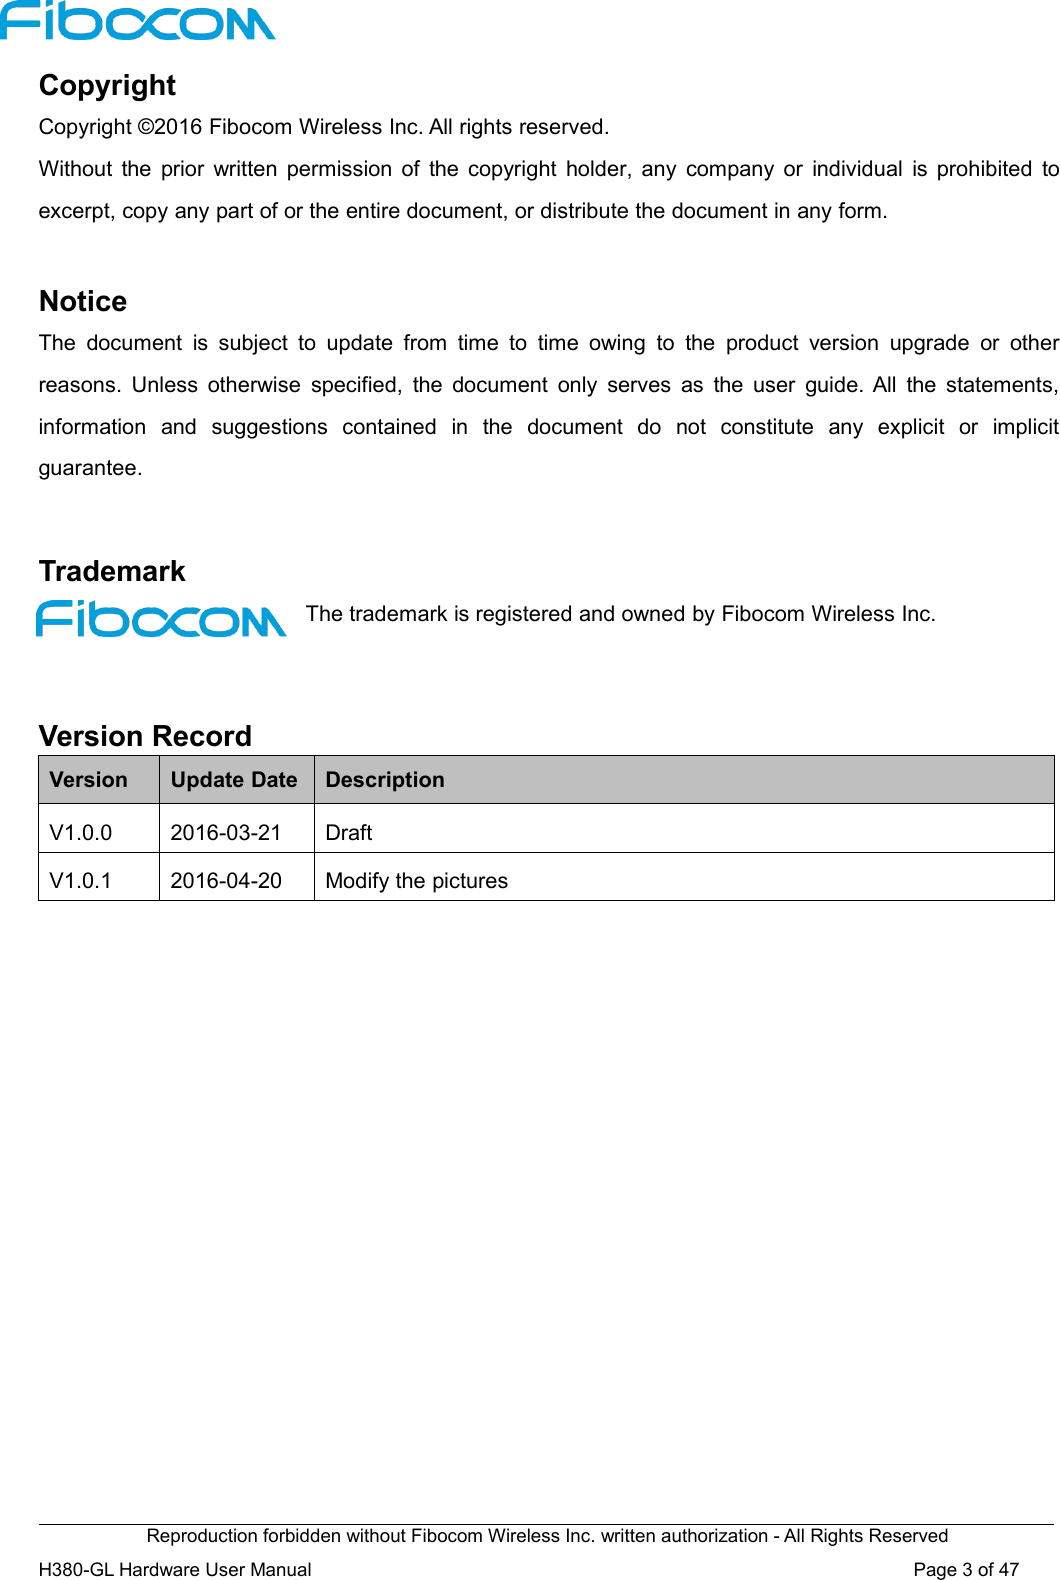 Reproduction forbidden without Fibocom Wireless Inc. written authorization - All Rights ReservedH380-GL Hardware User Manual Page3of47CopyrightCopyright ©2016 Fibocom Wireless Inc. All rights reserved.Without the prior written permission of the copyright holder, any company or individual is prohibited toexcerpt, copy any part of or the entire document, or distribute the document in any form.NoticeThe document is subject to update from time to time owing to the product version upgrade or otherreasons. Unless otherwise specified, the document only serves as the user guide. All the statements,information and suggestions contained in the document do not constitute any explicit or implicitguarantee.TrademarkThe trademark is registered and owned by Fibocom Wireless Inc.Version RecordVersionUpdate DateDescriptionV1.0.02016-03-21DraftV1.0.12016-04-20Modify the pictures